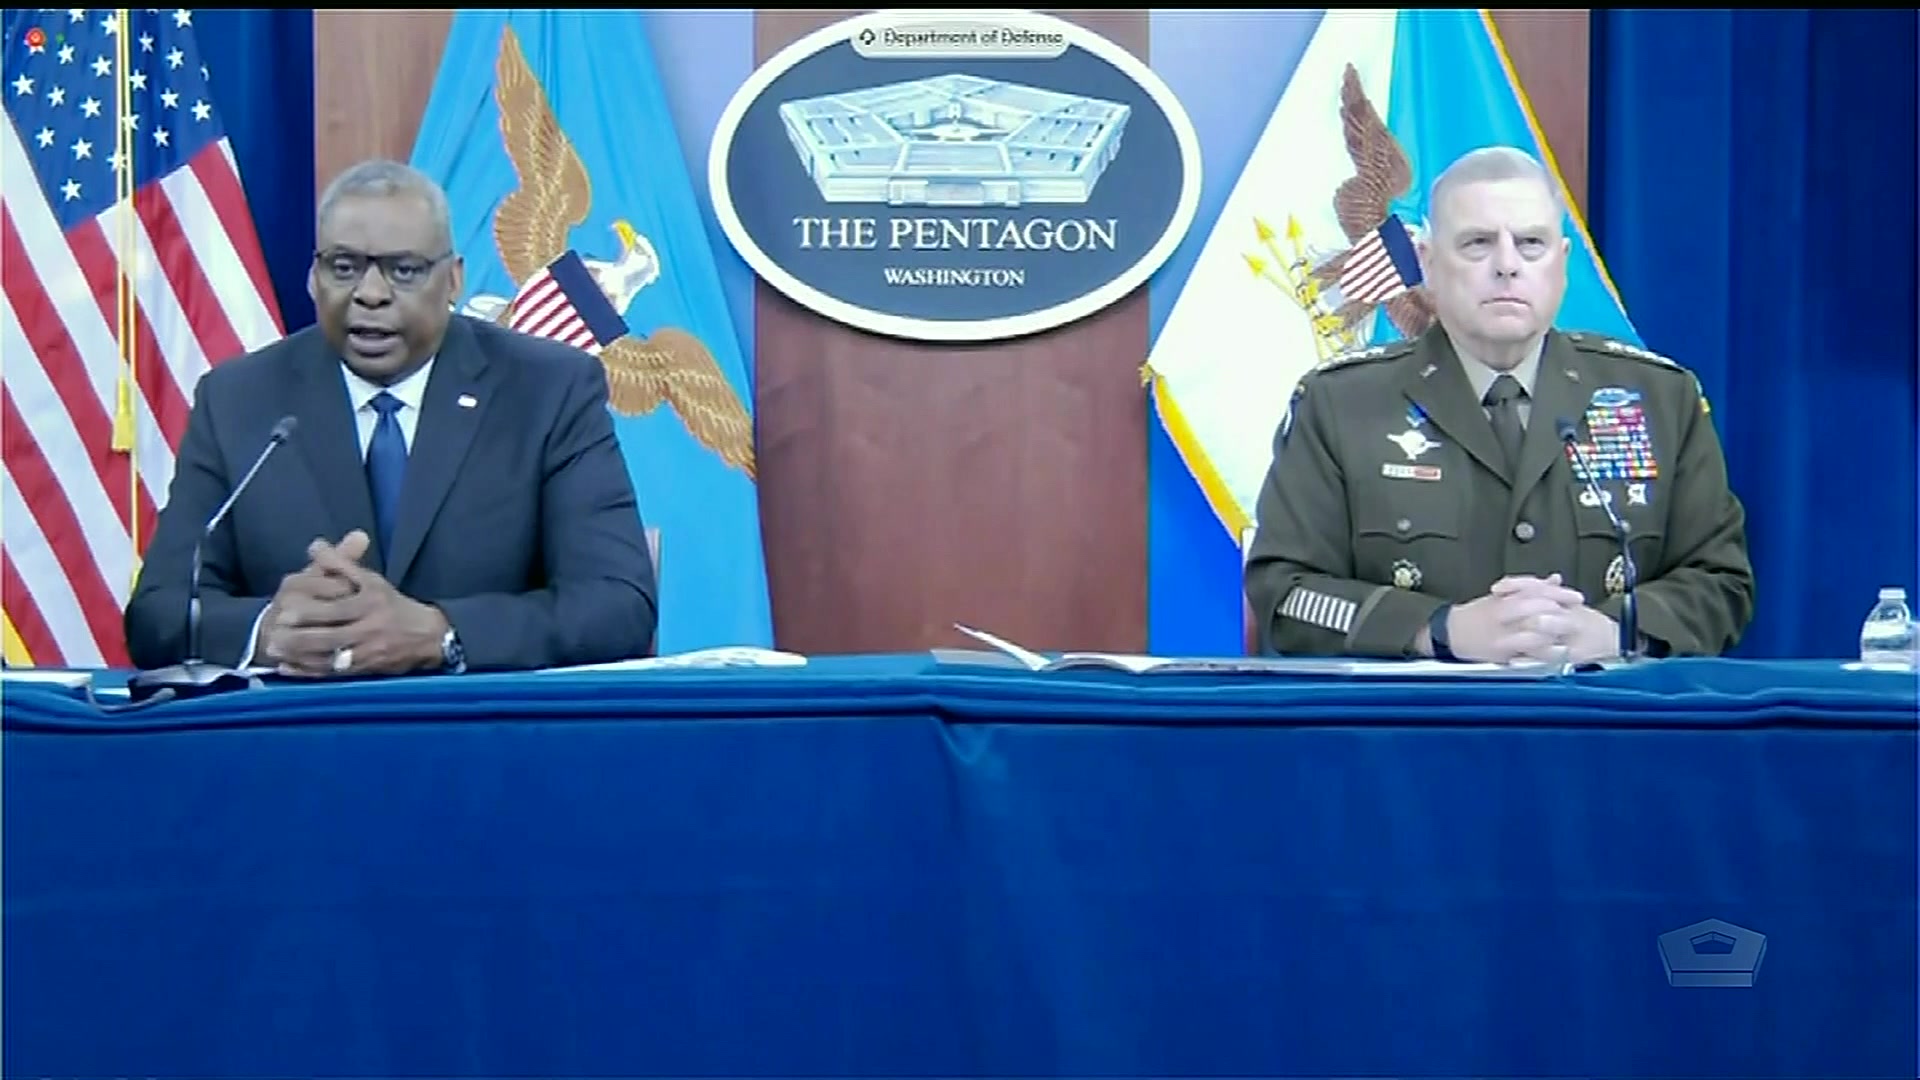 Secretary of Defense Lloyd J. Austin III and Army Gen. Mark A. Milley, chairman of the Joint Chiefs of Staff, testify before the House Appropriations Committee's Subcommittee on Defense regarding the Defense Department's fiscal year 2022 budget, May 27, 2021.